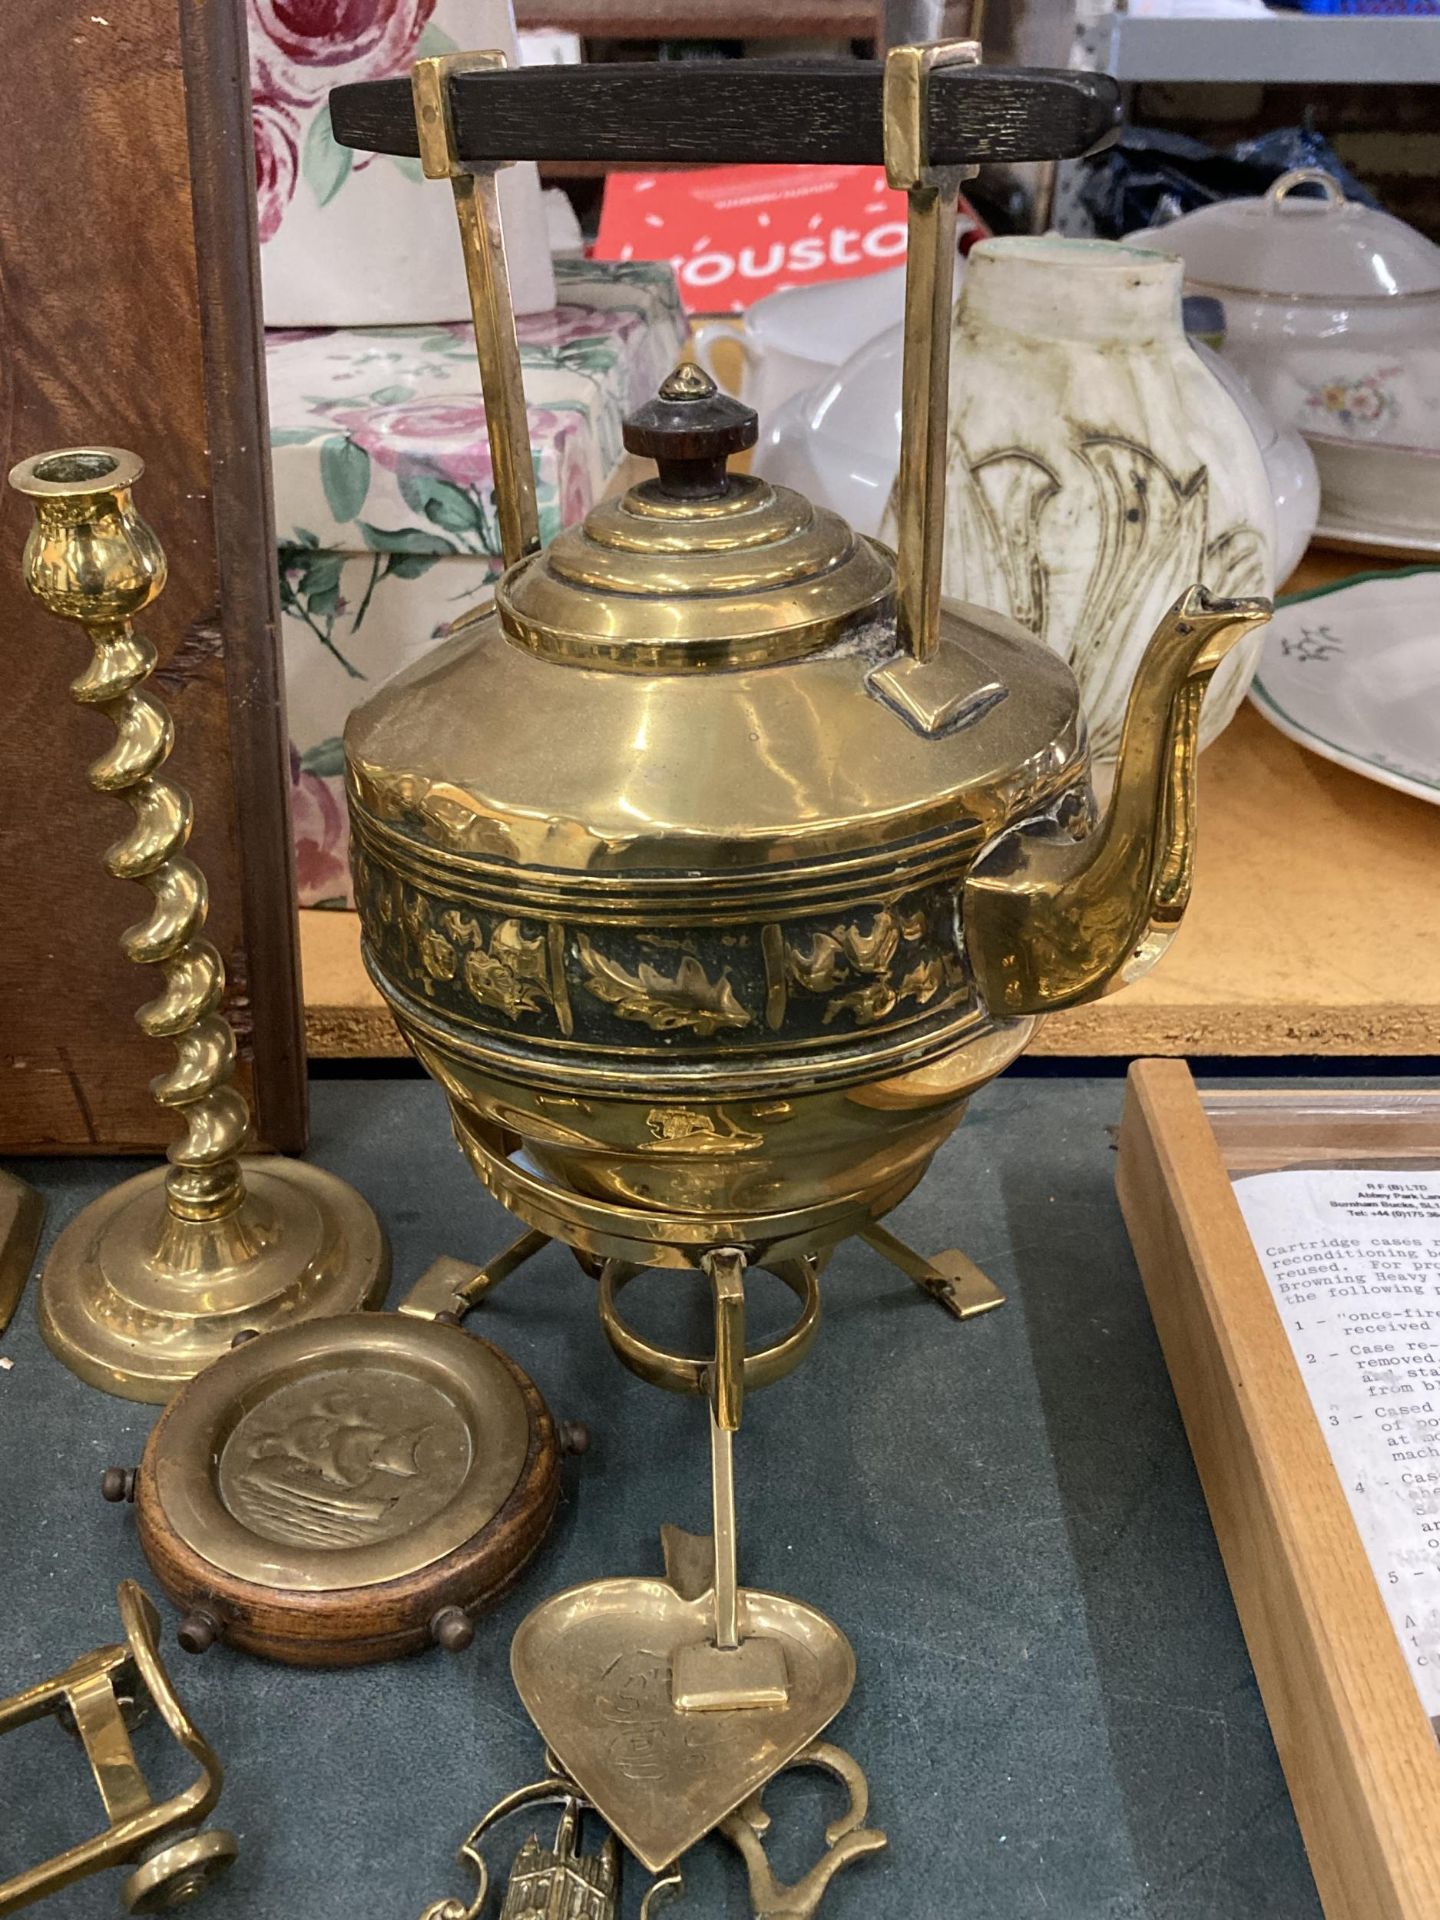 A LARGE MIXED GROUP OF BRASS AND FURTHER ITEMS - SPIRIT KETTLE ON STAND, HORSE BRASS, WOODEN AND - Image 2 of 5